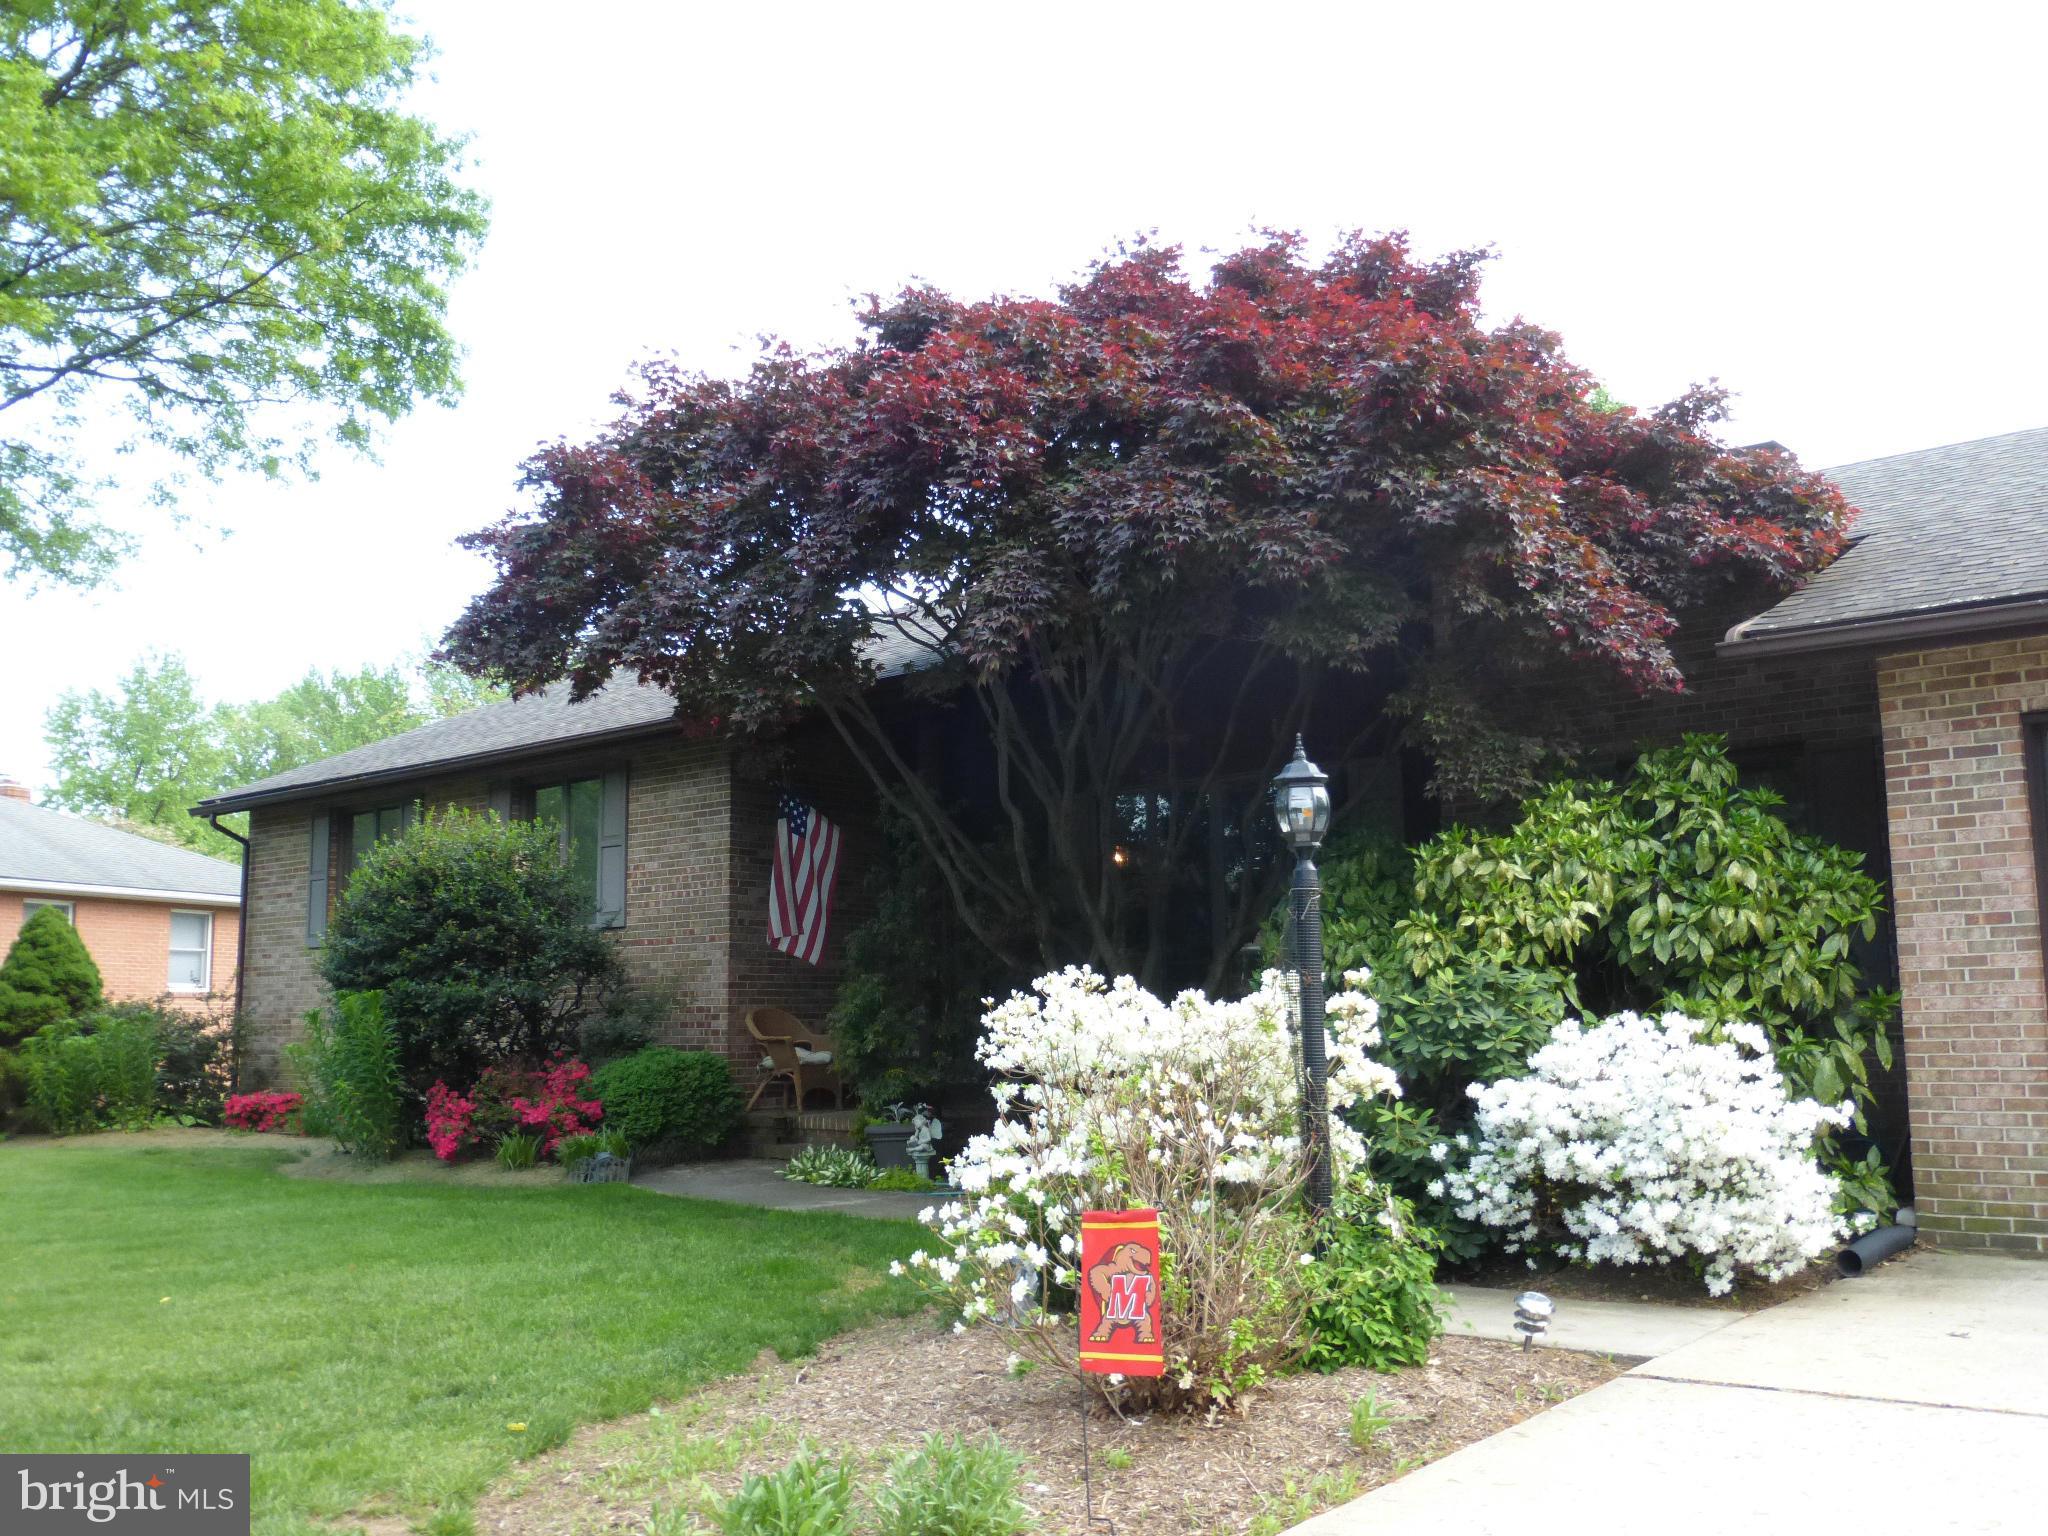 a front view of a house with a yard and a tree